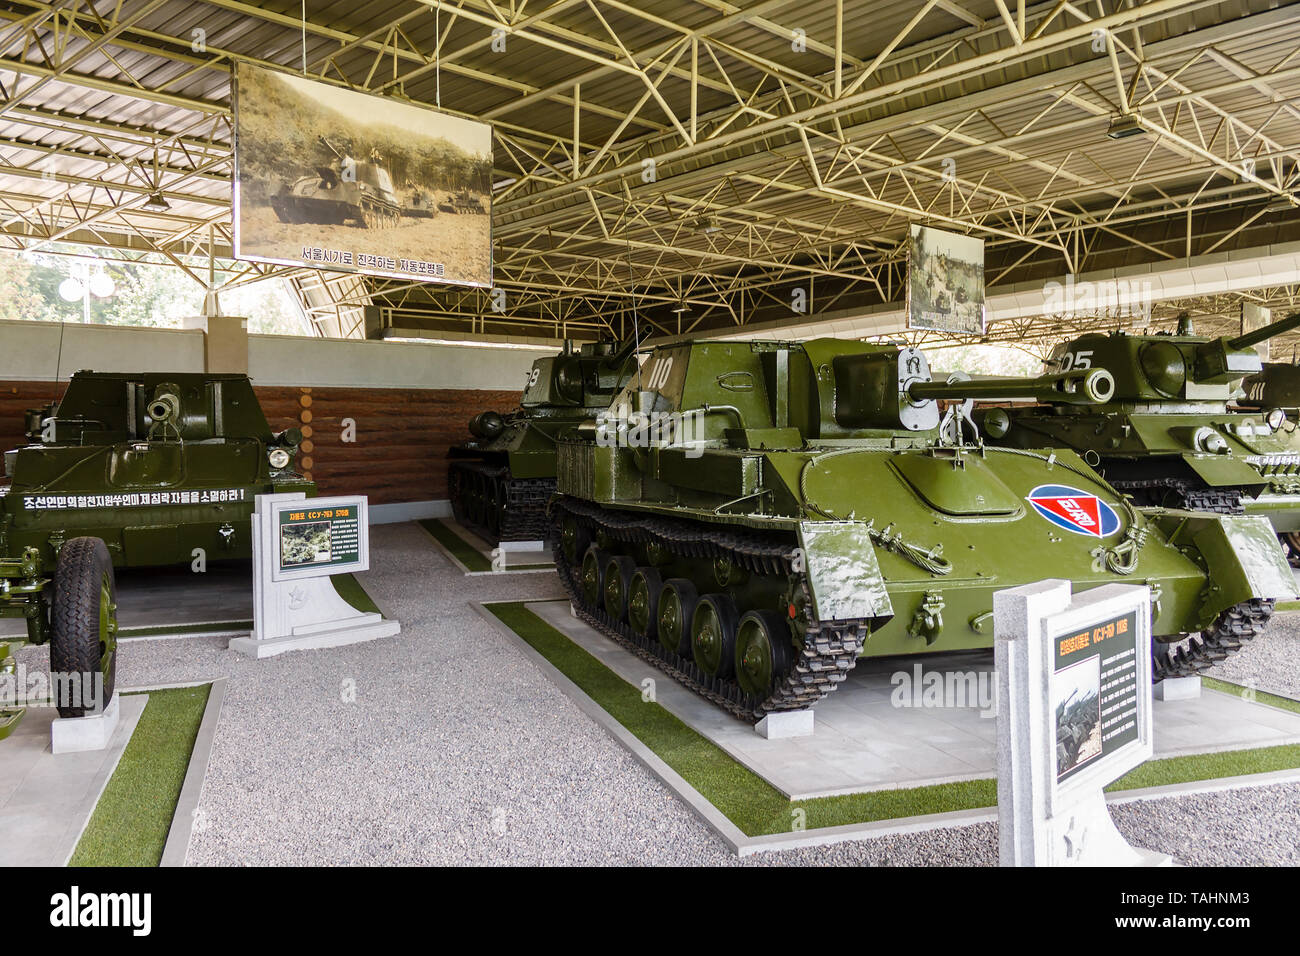 Pyongyang, North Korea - July 29, 2014: Victorious Fatherland Liberation War Museum. Self-propelled gun SU-76, which participated in the Korean War. Stock Photo